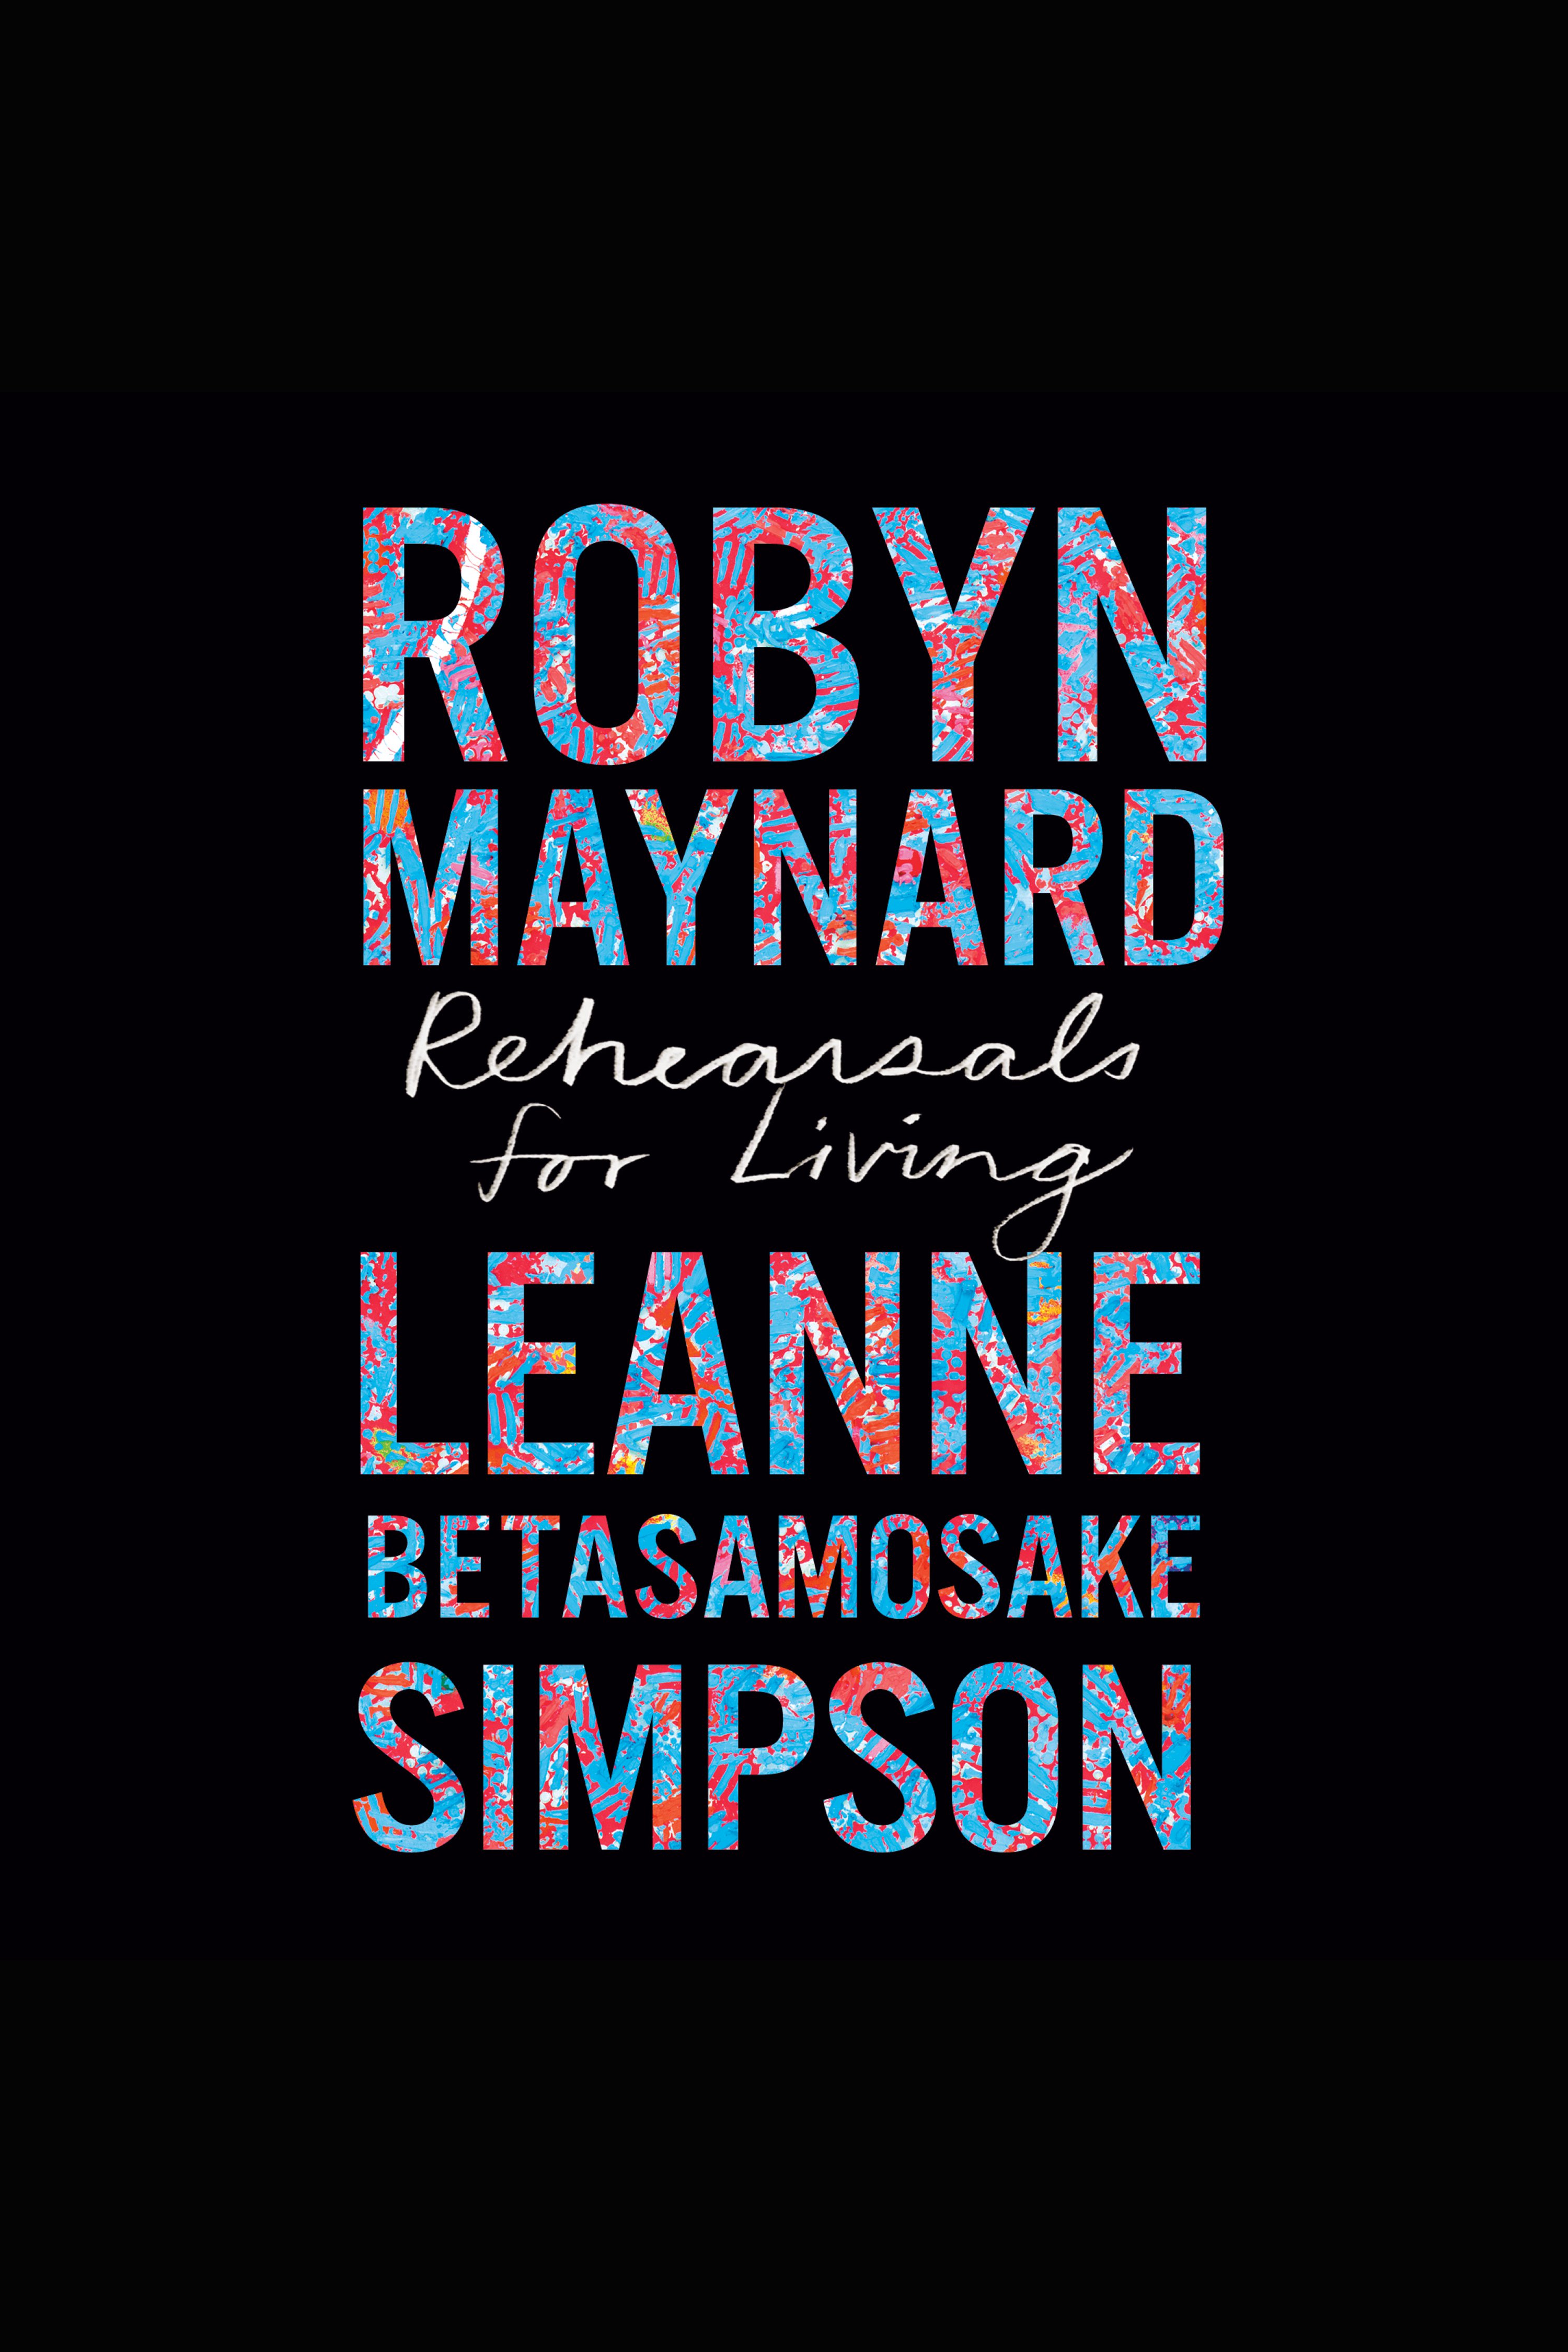 Cover Image of Rehearsals for Living